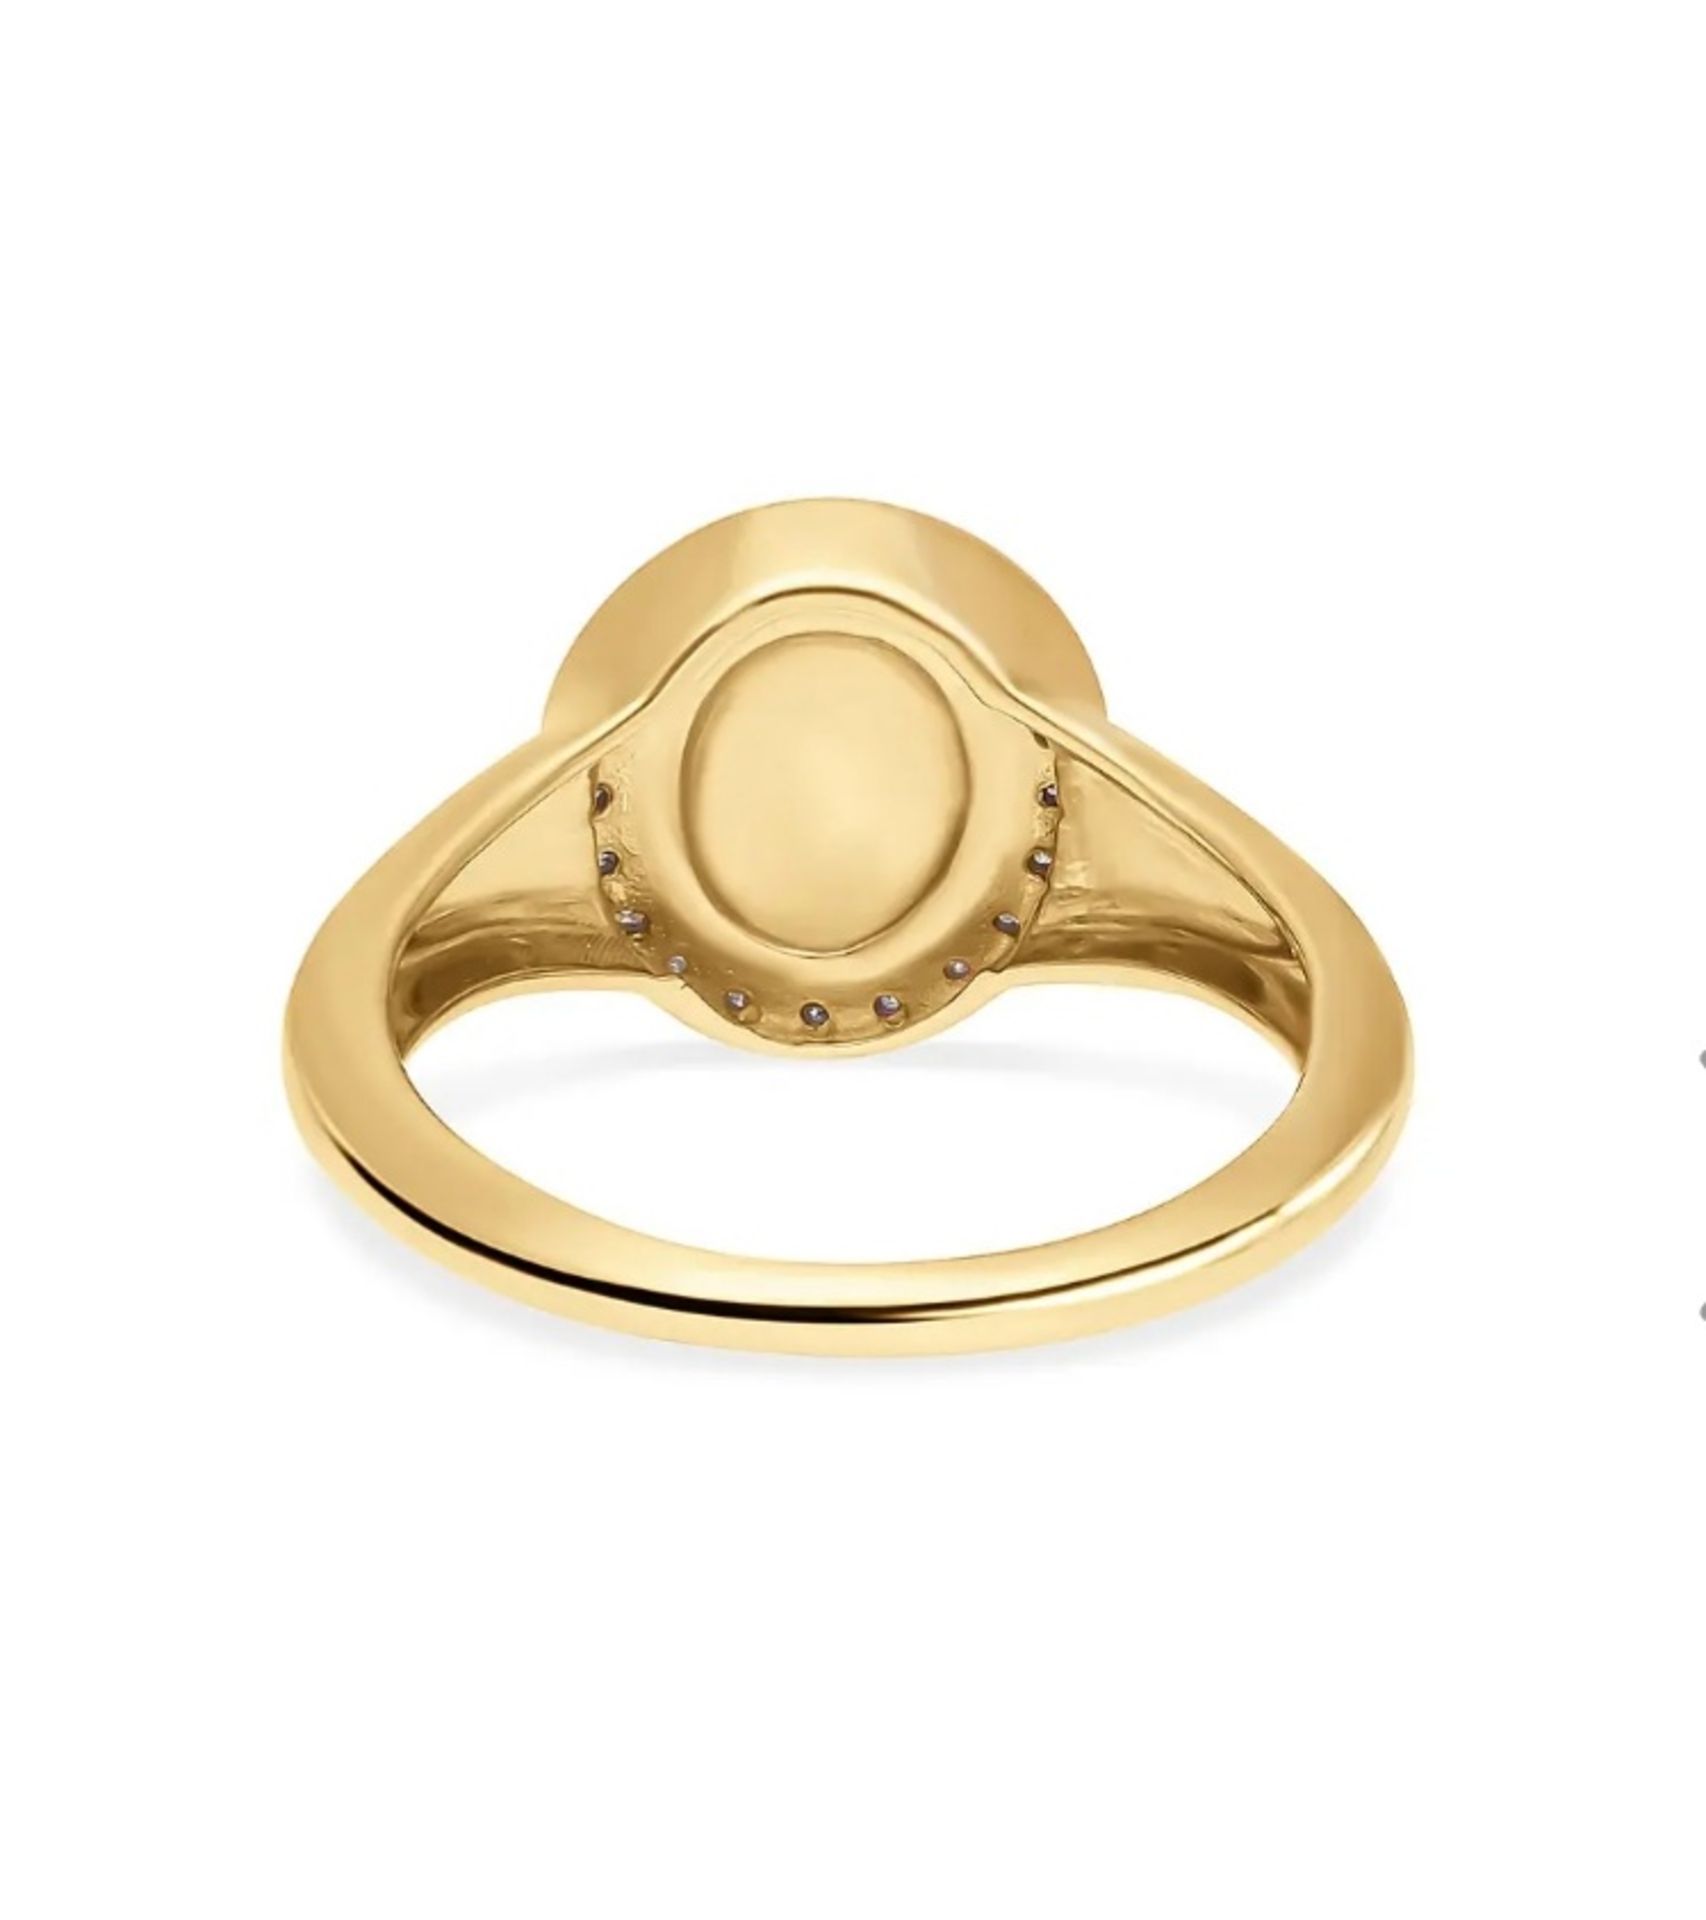 New! Diamond Ring in Vermeil Yellow Gold Plated Sterling Silver - Image 5 of 5